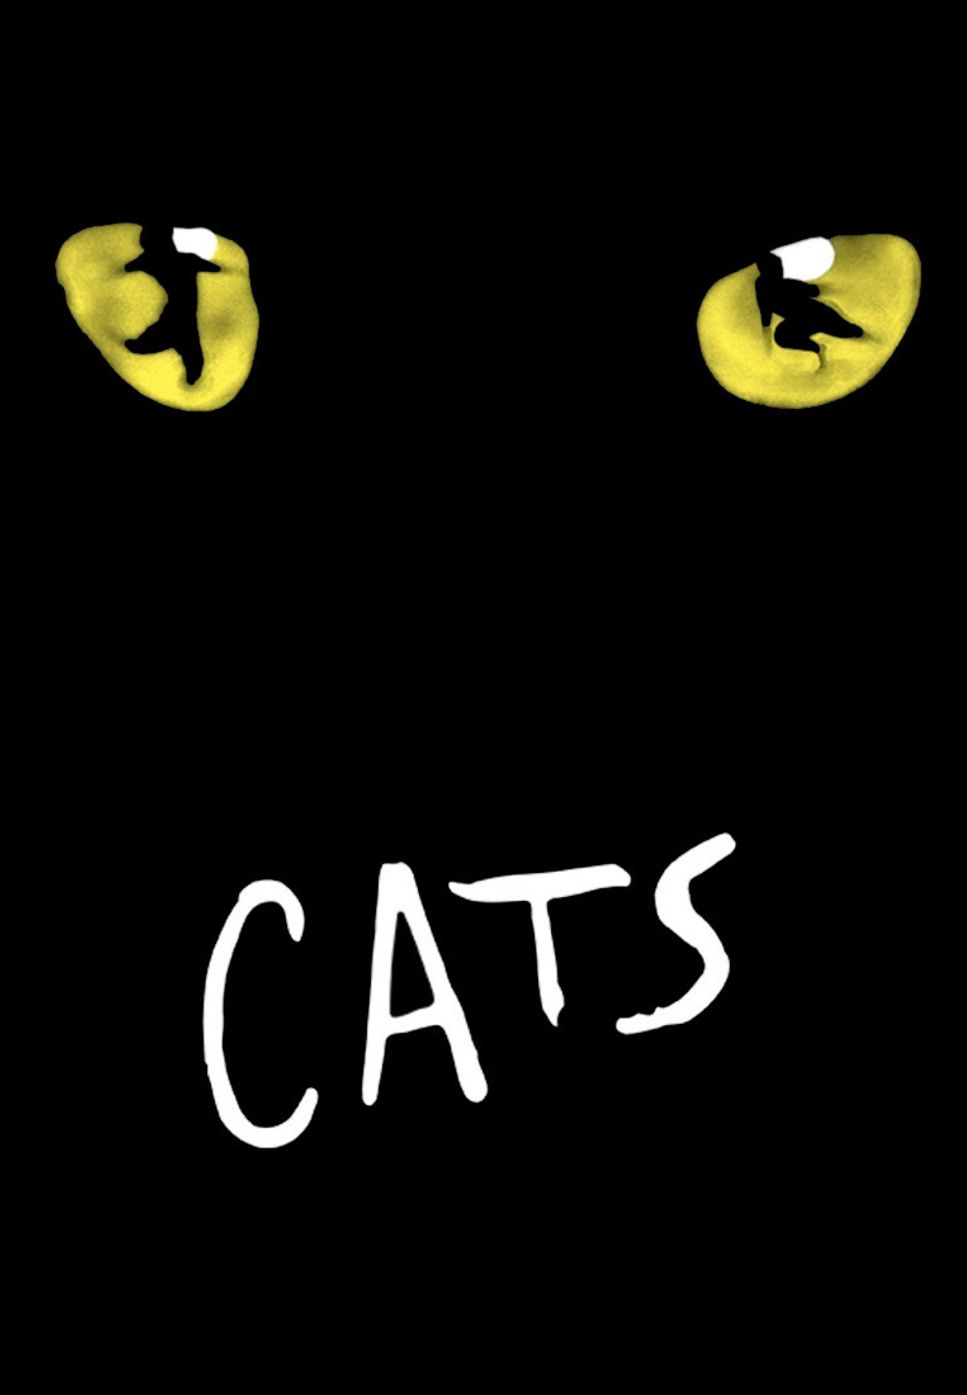 Andrew Lloyd Webber - Memory (Cats musical) by Pei-Ying Pan